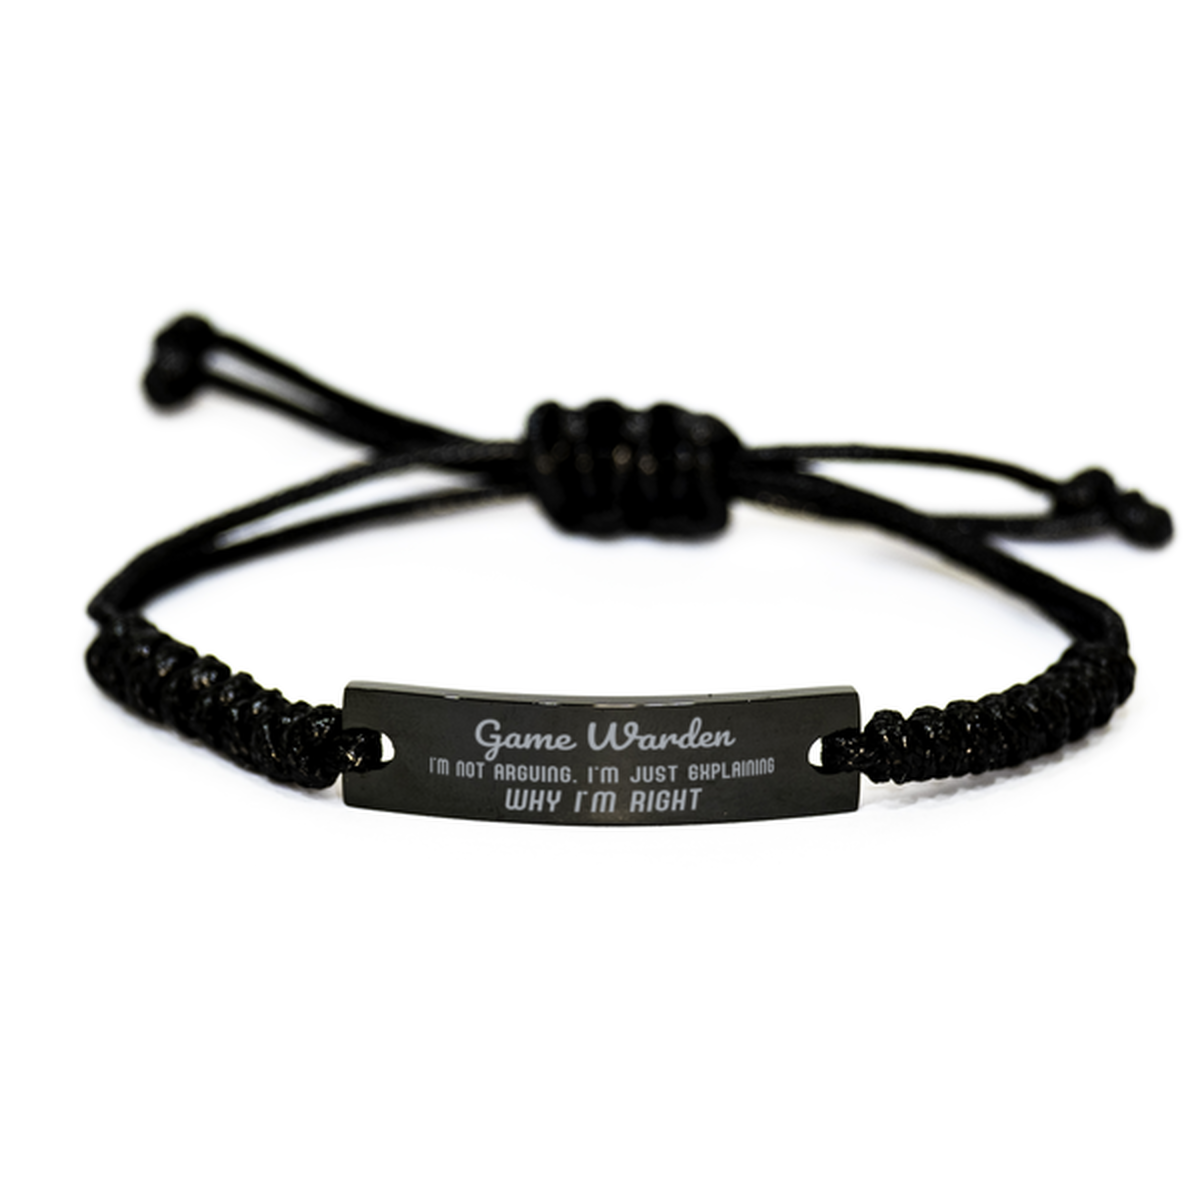 Game Warden I'm not Arguing. I'm Just Explaining Why I'm RIGHT Black Rope Bracelet, Funny Saying Quote Game Warden Gifts For Game Warden Graduation Birthday Christmas Gifts for Men Women Coworker